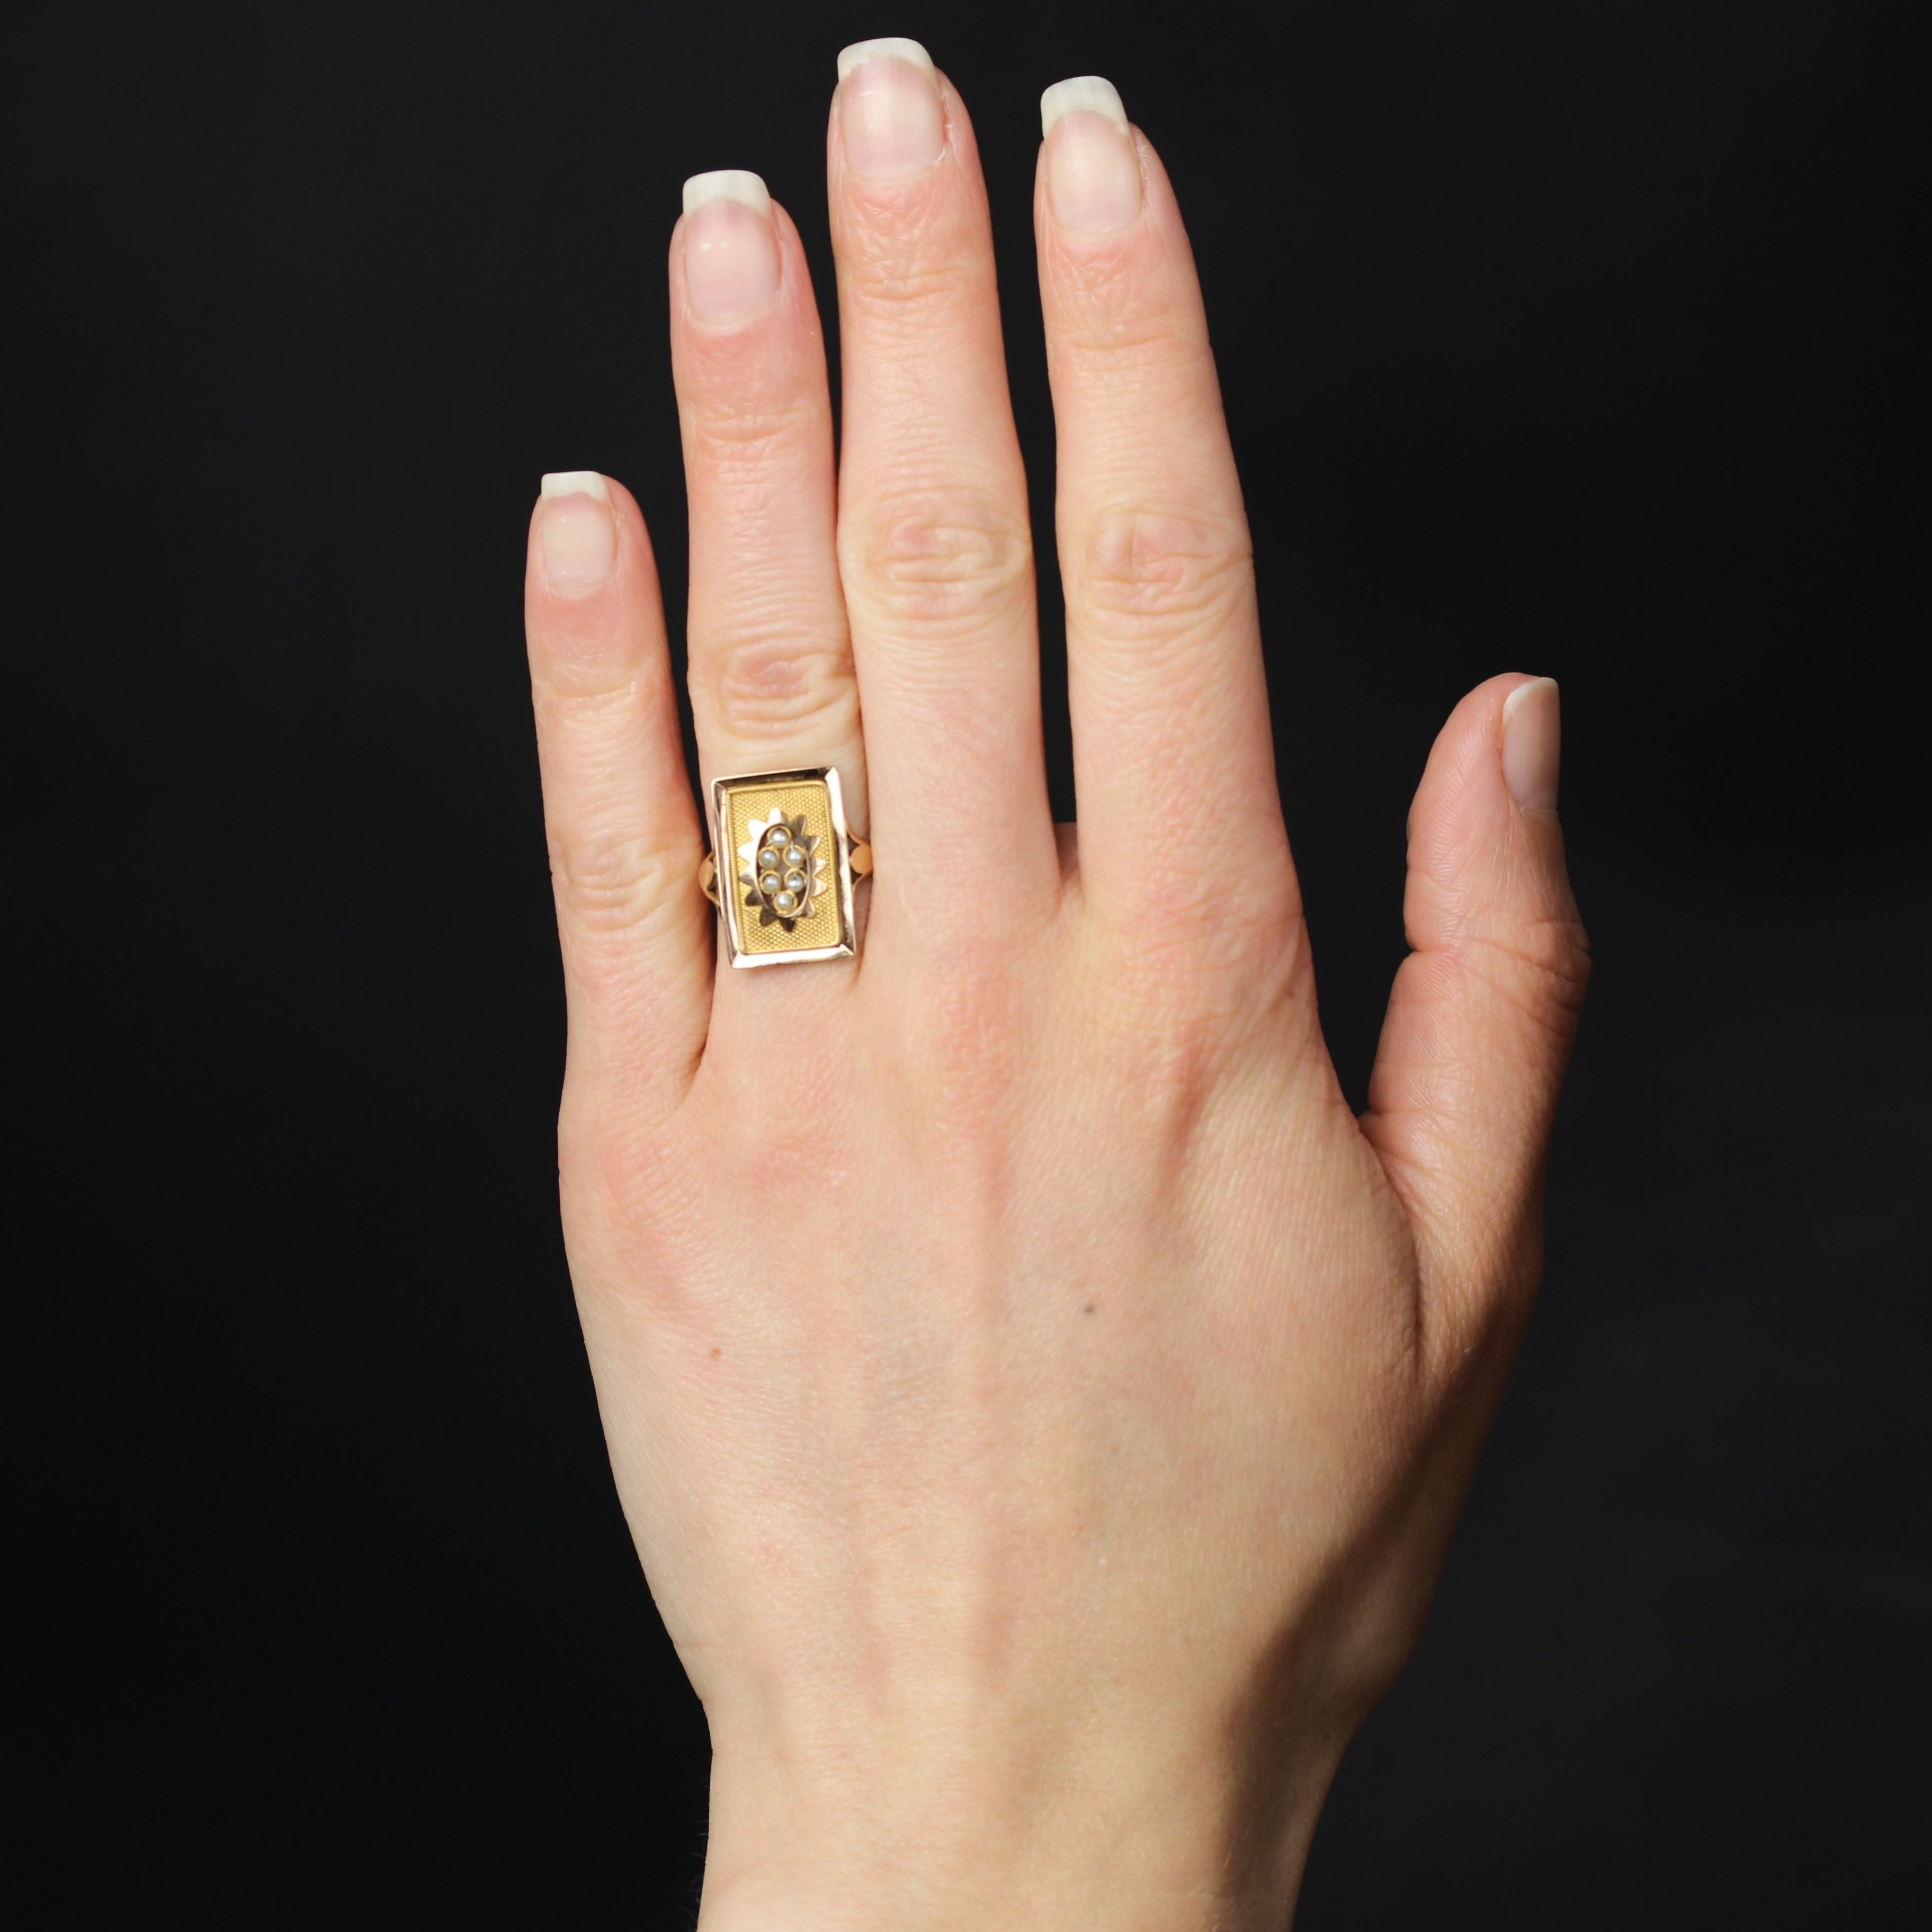 Ring in 18 karat yellow gold, eagle head hallmark.
This original antique ring features a rectangular gold plate with fine pearls held in place by gold wire in the center of a flower motif. The bottom is decorated with a honeycomb in gold and edged